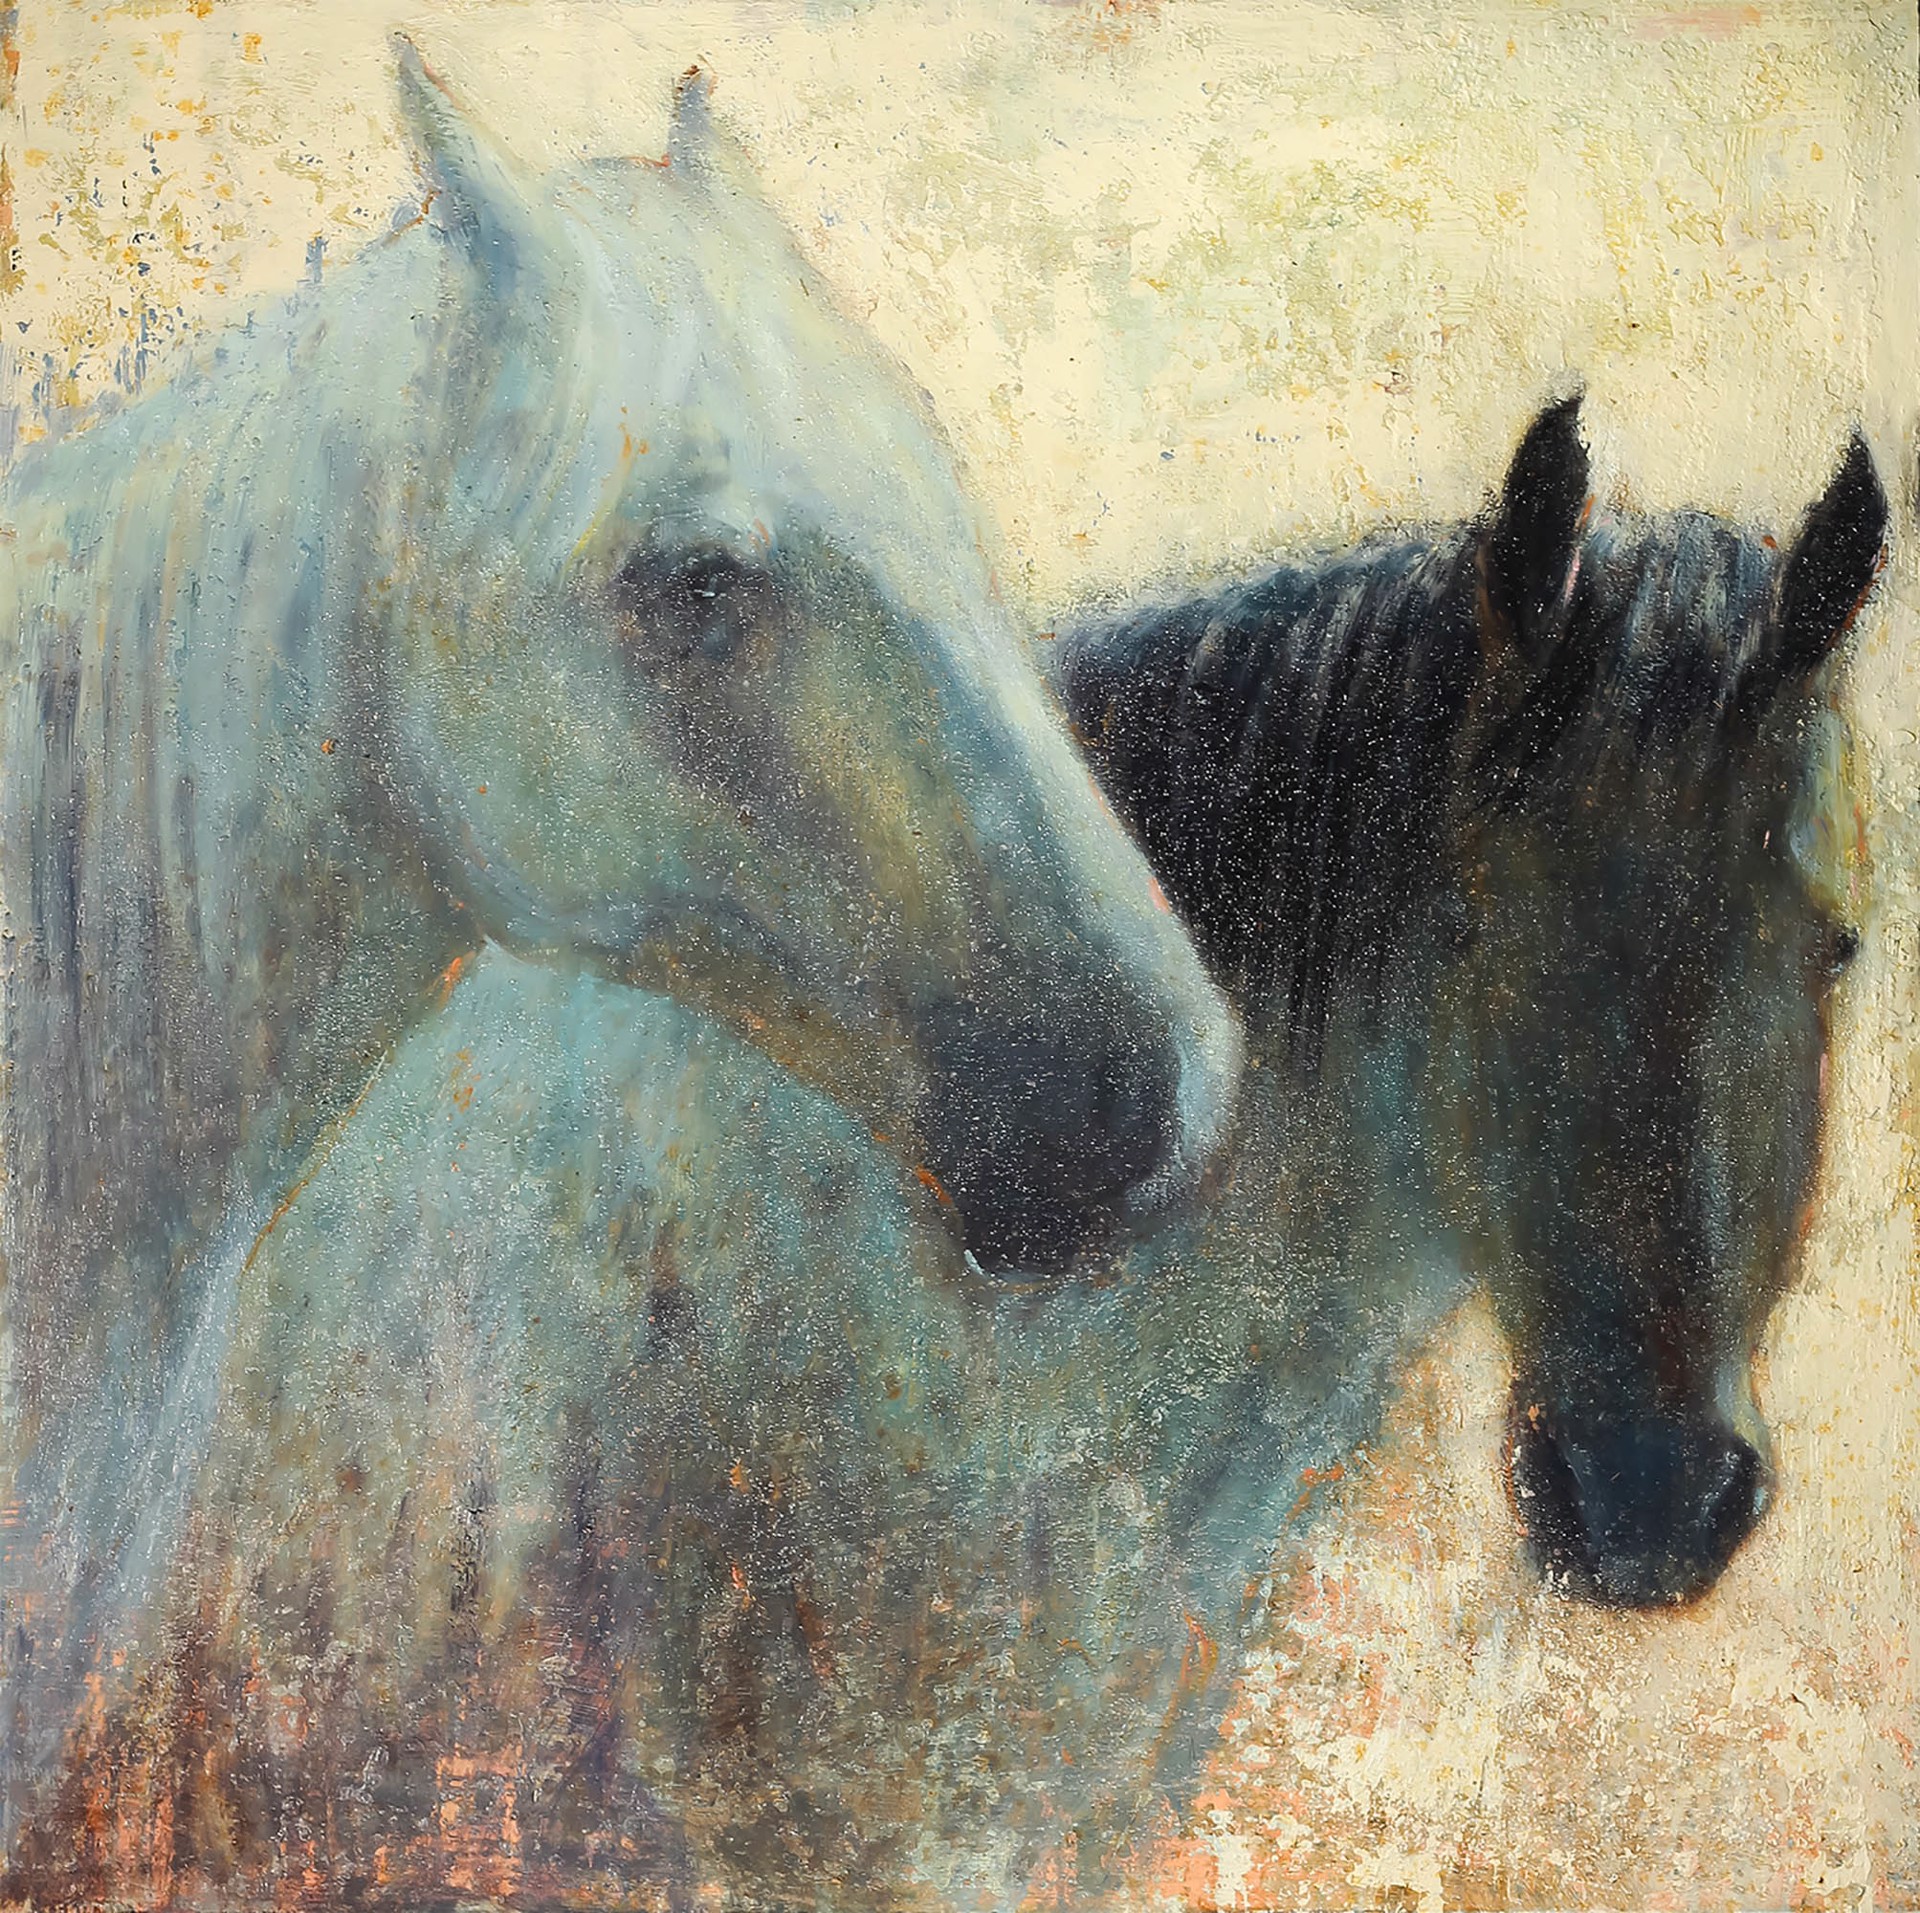 An Original Mixed Media Painting Of Two Horses With A Contemporary Tan Background, By Matt Flint At Gallery Wild